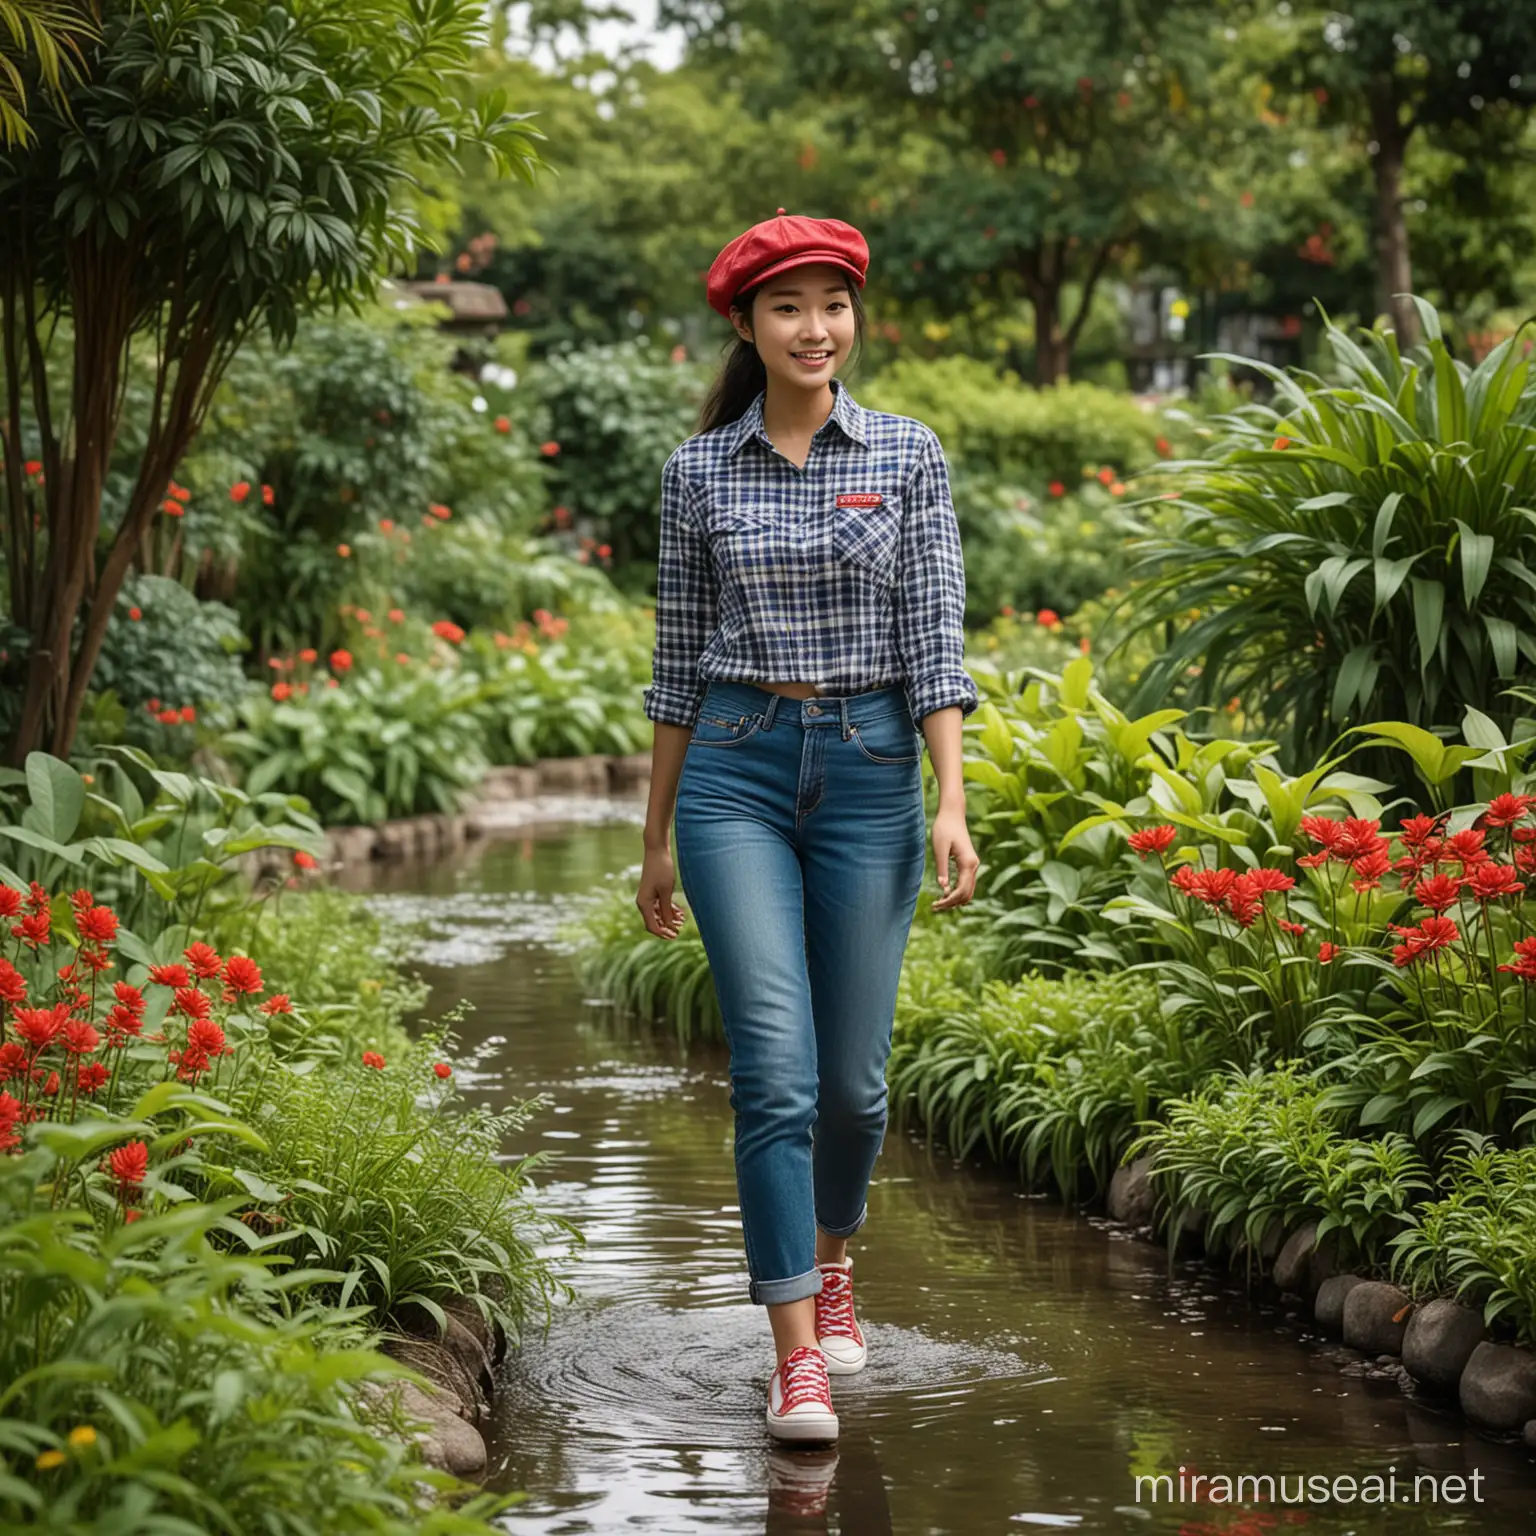 (best quality: 1.2, high resolution, realistic, photographic), young Asian woman from Indonesia wearing a blue and black checkered collared shirt, blue Levi's jeans, white shoes, and a red feathered beret hat with subtle details, taking a casual walk in a small park garden with a flowing stream and vibrant green and red plants.